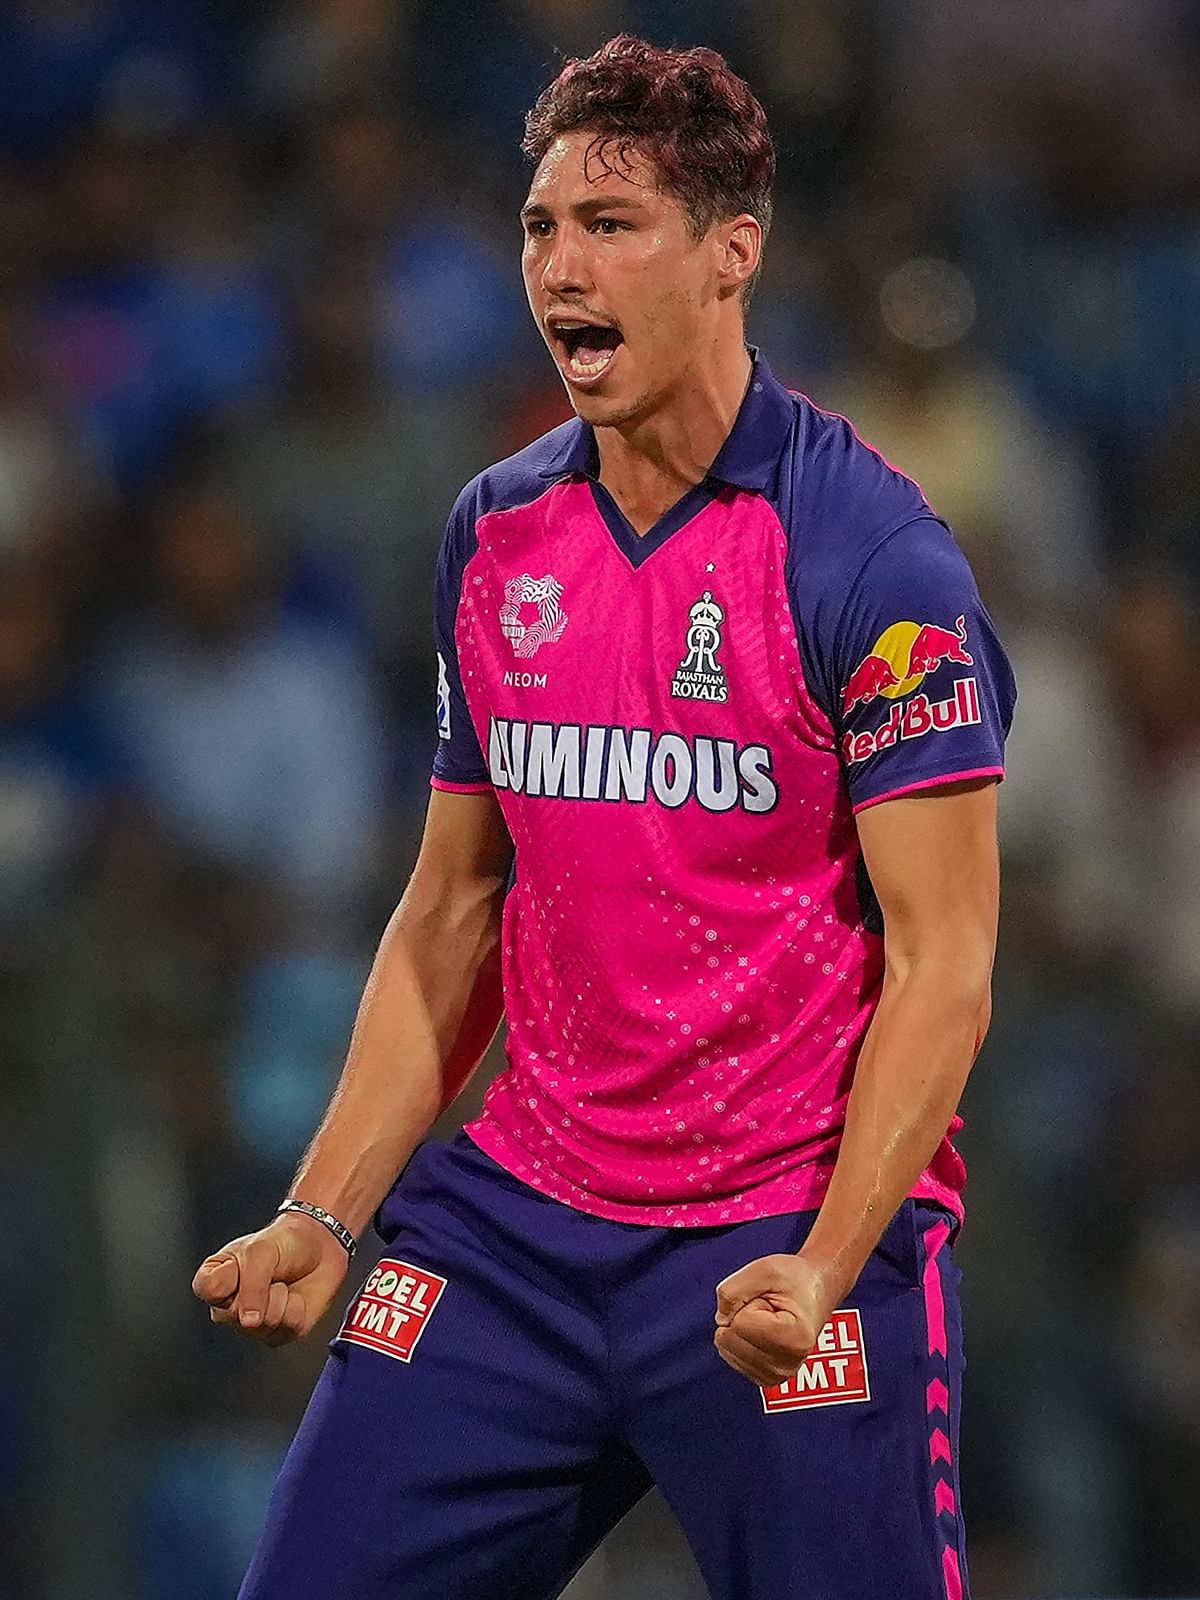  Rajasthan Royals bowler Nandre Burger has showcased impeccable performance as an impact player. It remains to be seen if he makes it to the starting 11. 